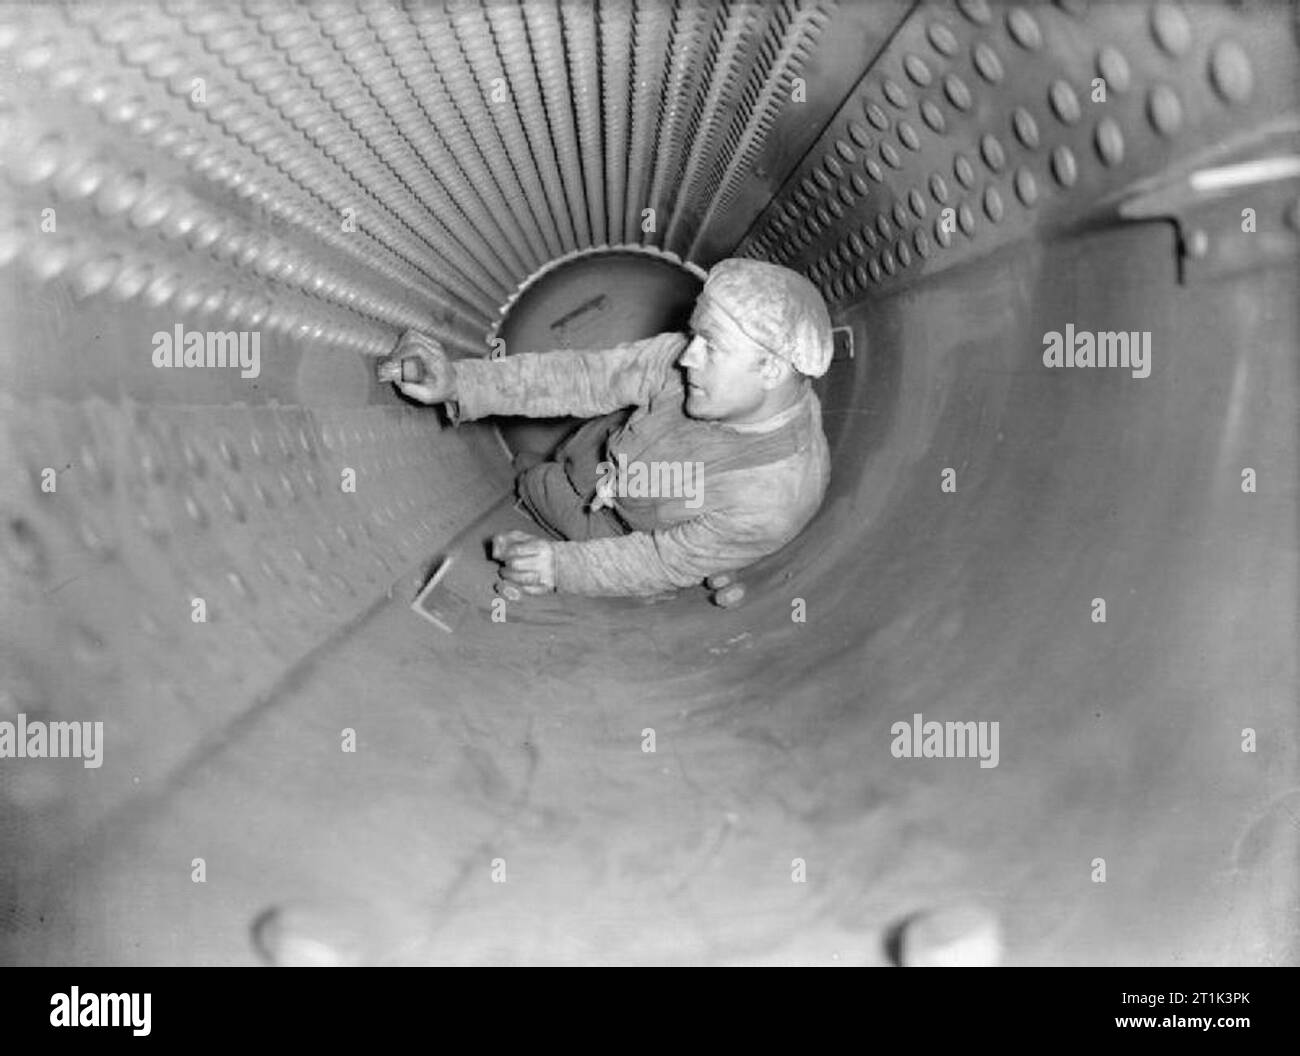 The Royal Navy during the Second World War A stoker cleaning inside the boiler of the cruiser HMS CURACOA at Rosyth. The inside of the boiler is 4 feet in diameter and 12 feet long. Stock Photo